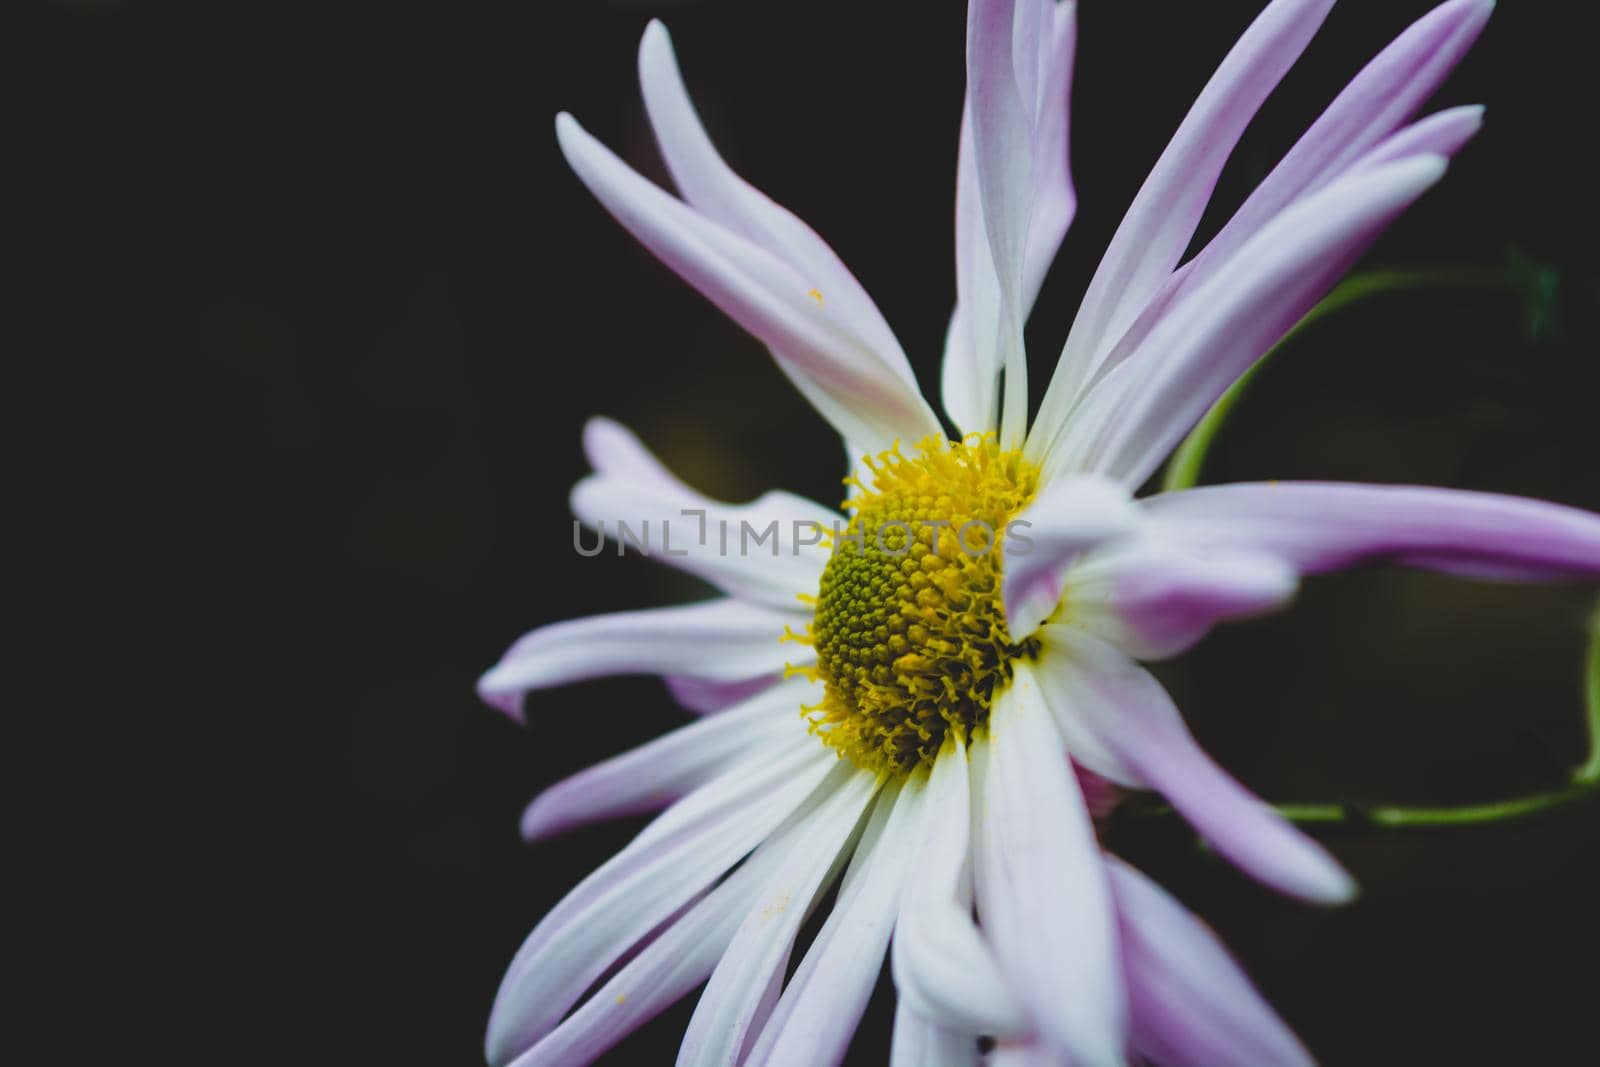 Blooming chrysanthemum, white-lilac flower on a dark background. Selective focus.